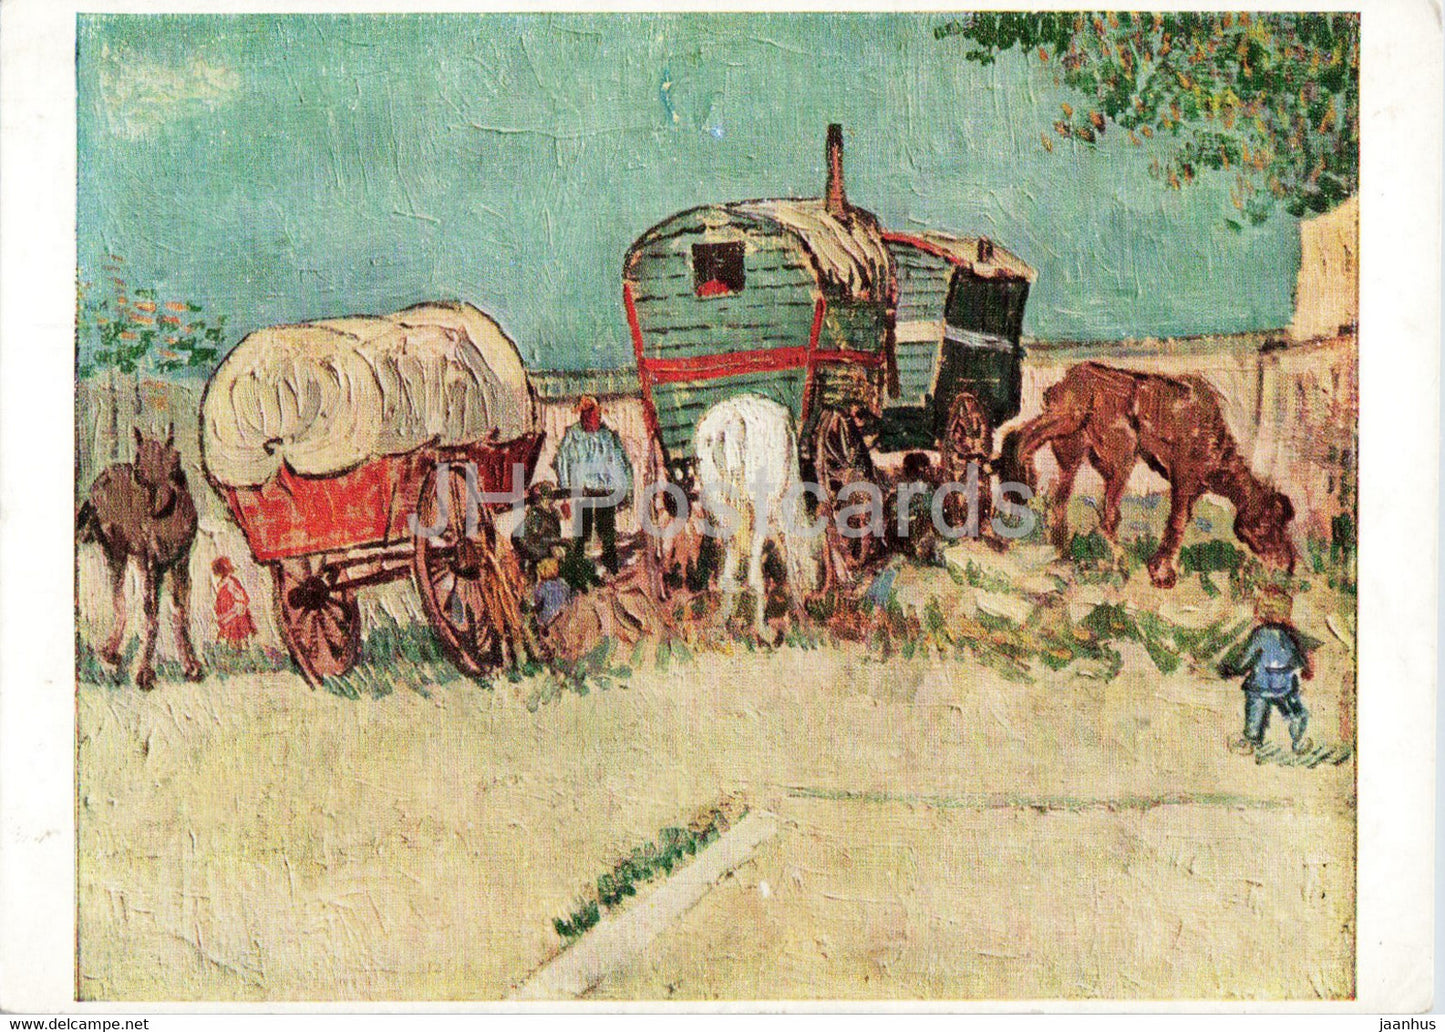 painting by Vincent van Gogh - The Gipsies - horse carriage - Dutch art - England - unused - JH Postcards